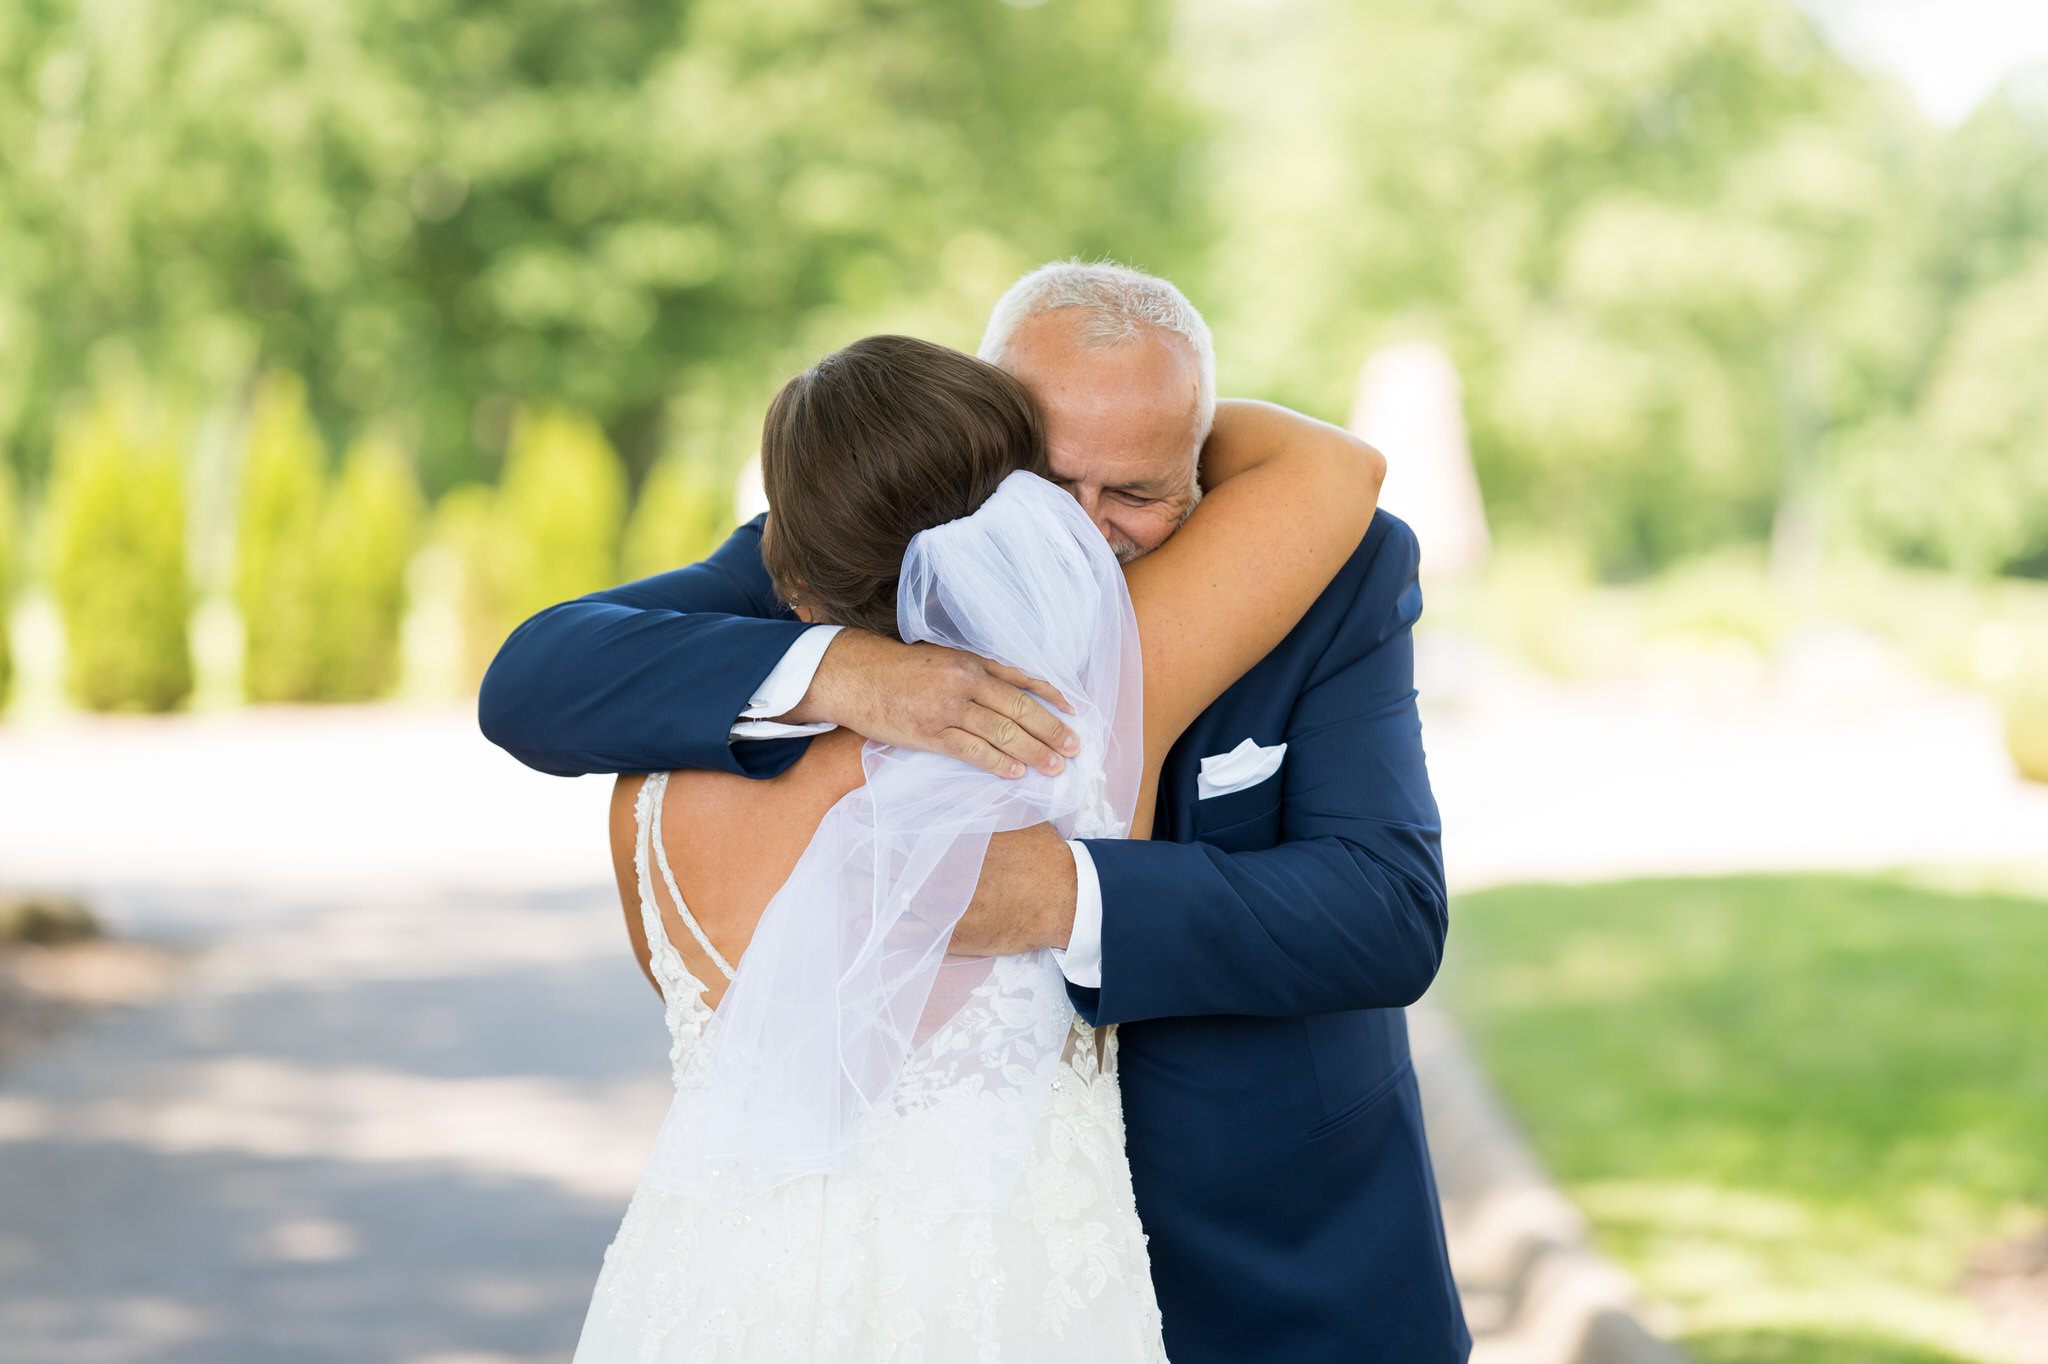 a dad shares a hug with his daughter on her wedding day